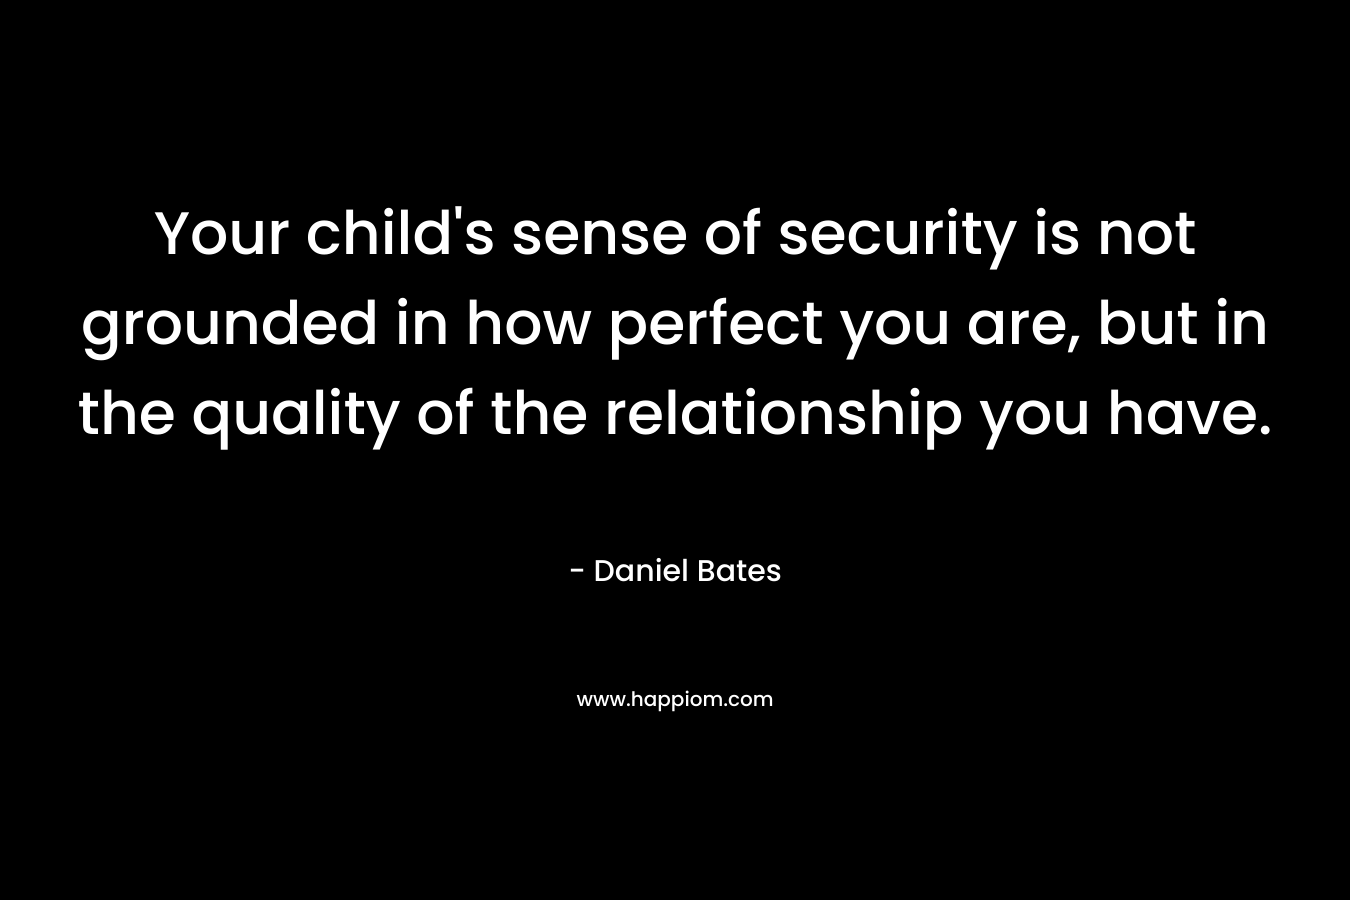 Your child's sense of security is not grounded in how perfect you are, but in the quality of the relationship you have.